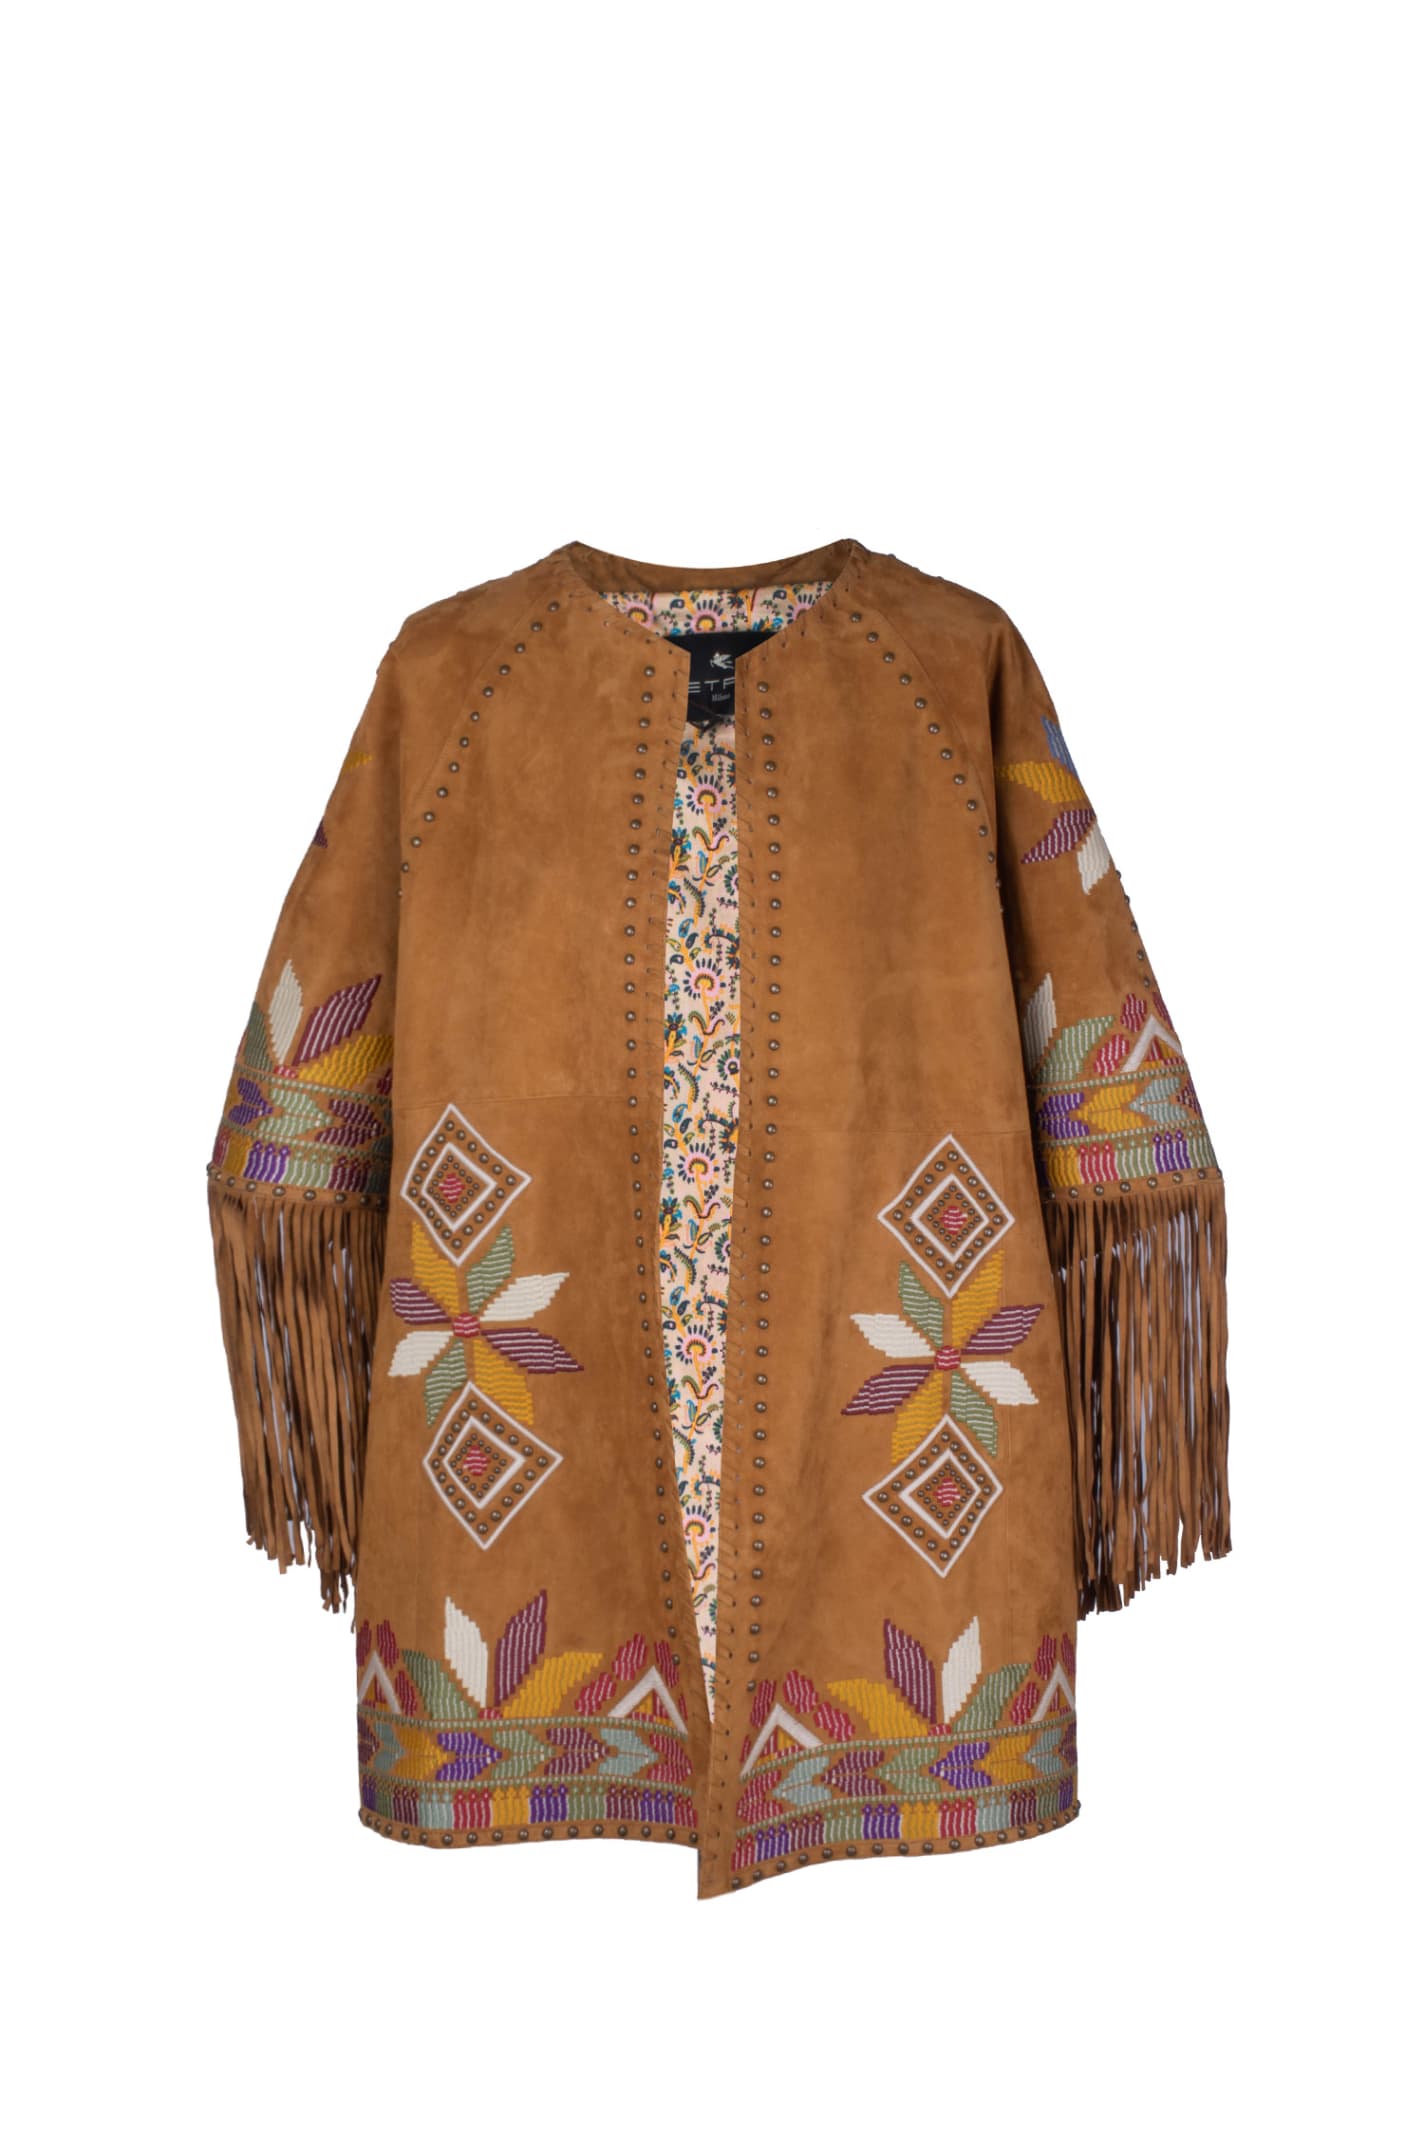 Etro Suede Jacket With Embroidery, Studs And Fringe